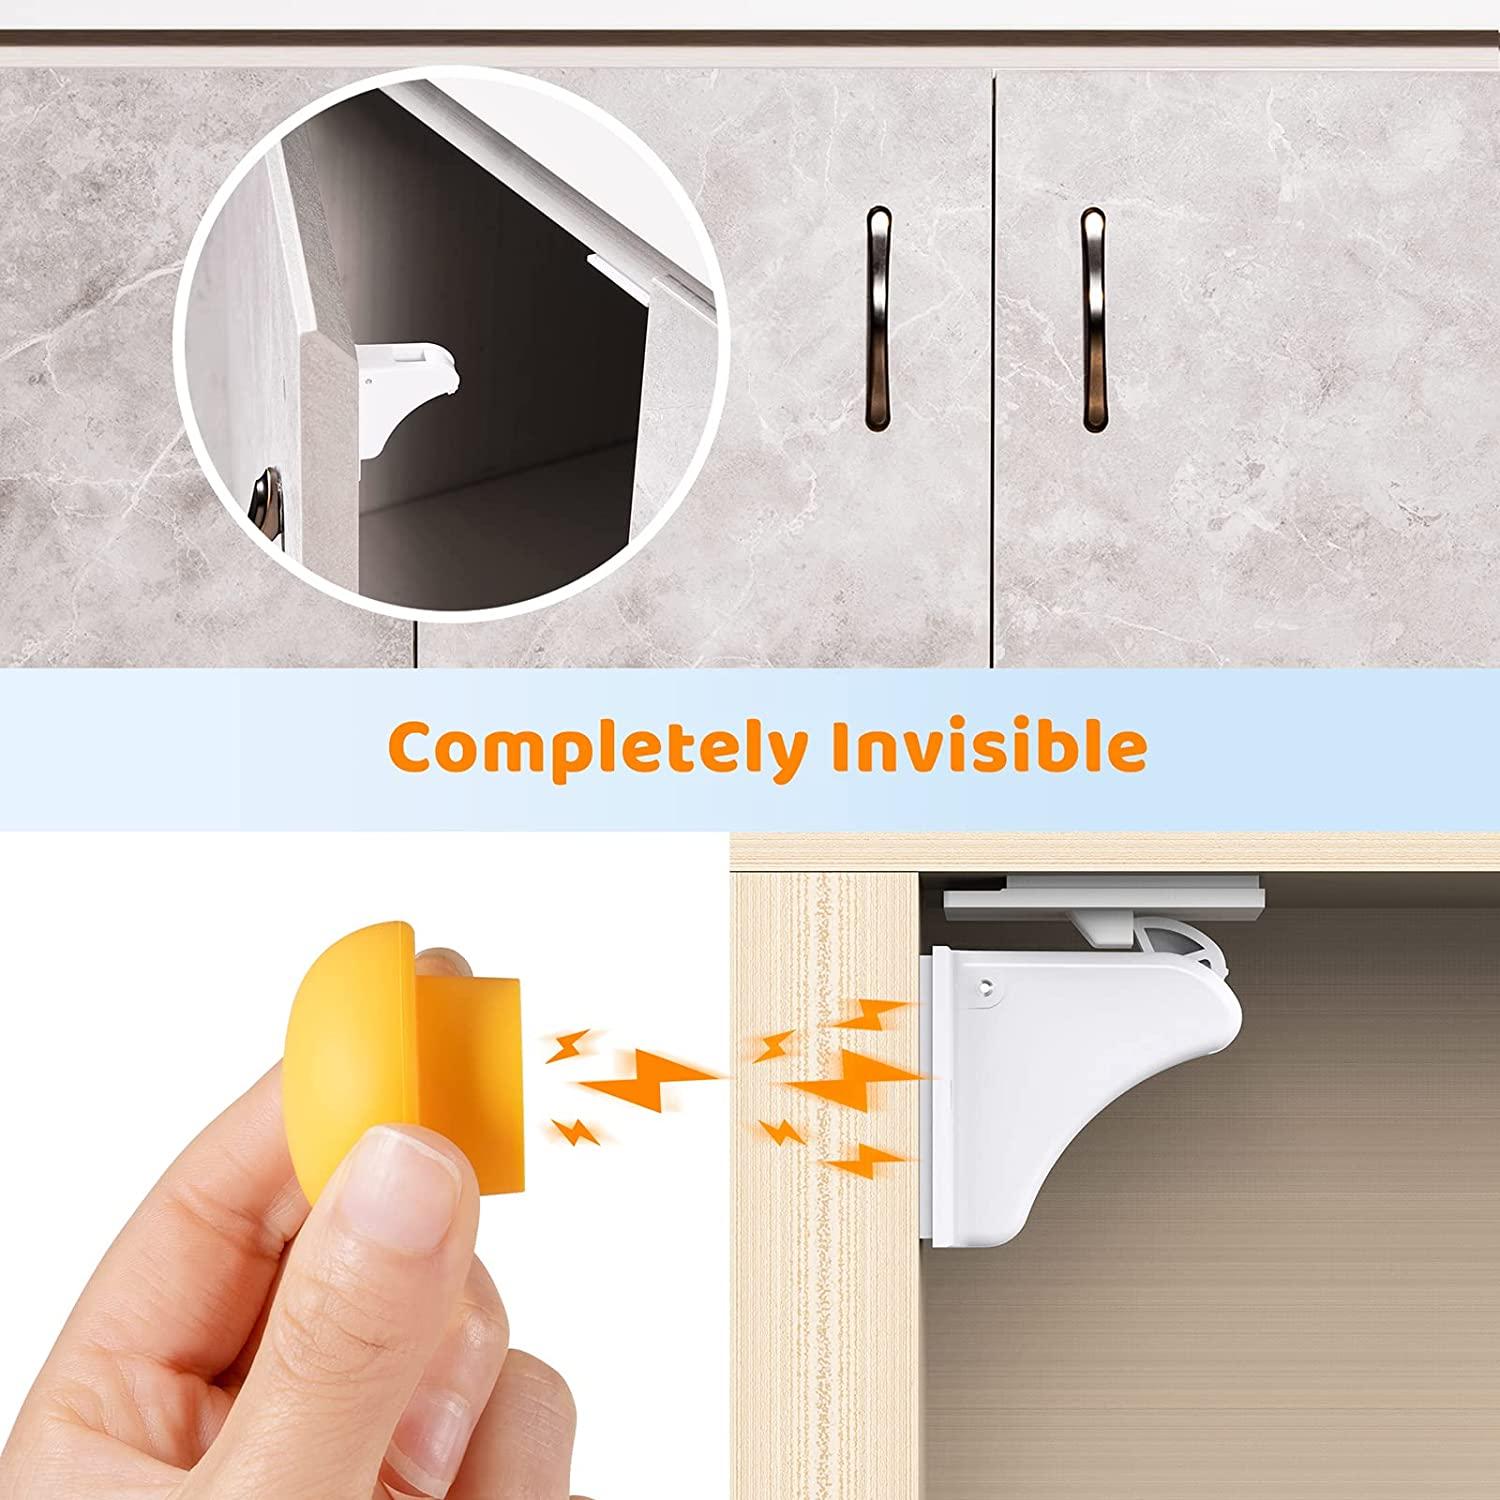 How to Install Magnetic Cabinet Locks  Baby Proofing Magnetic Cabinet Locks  